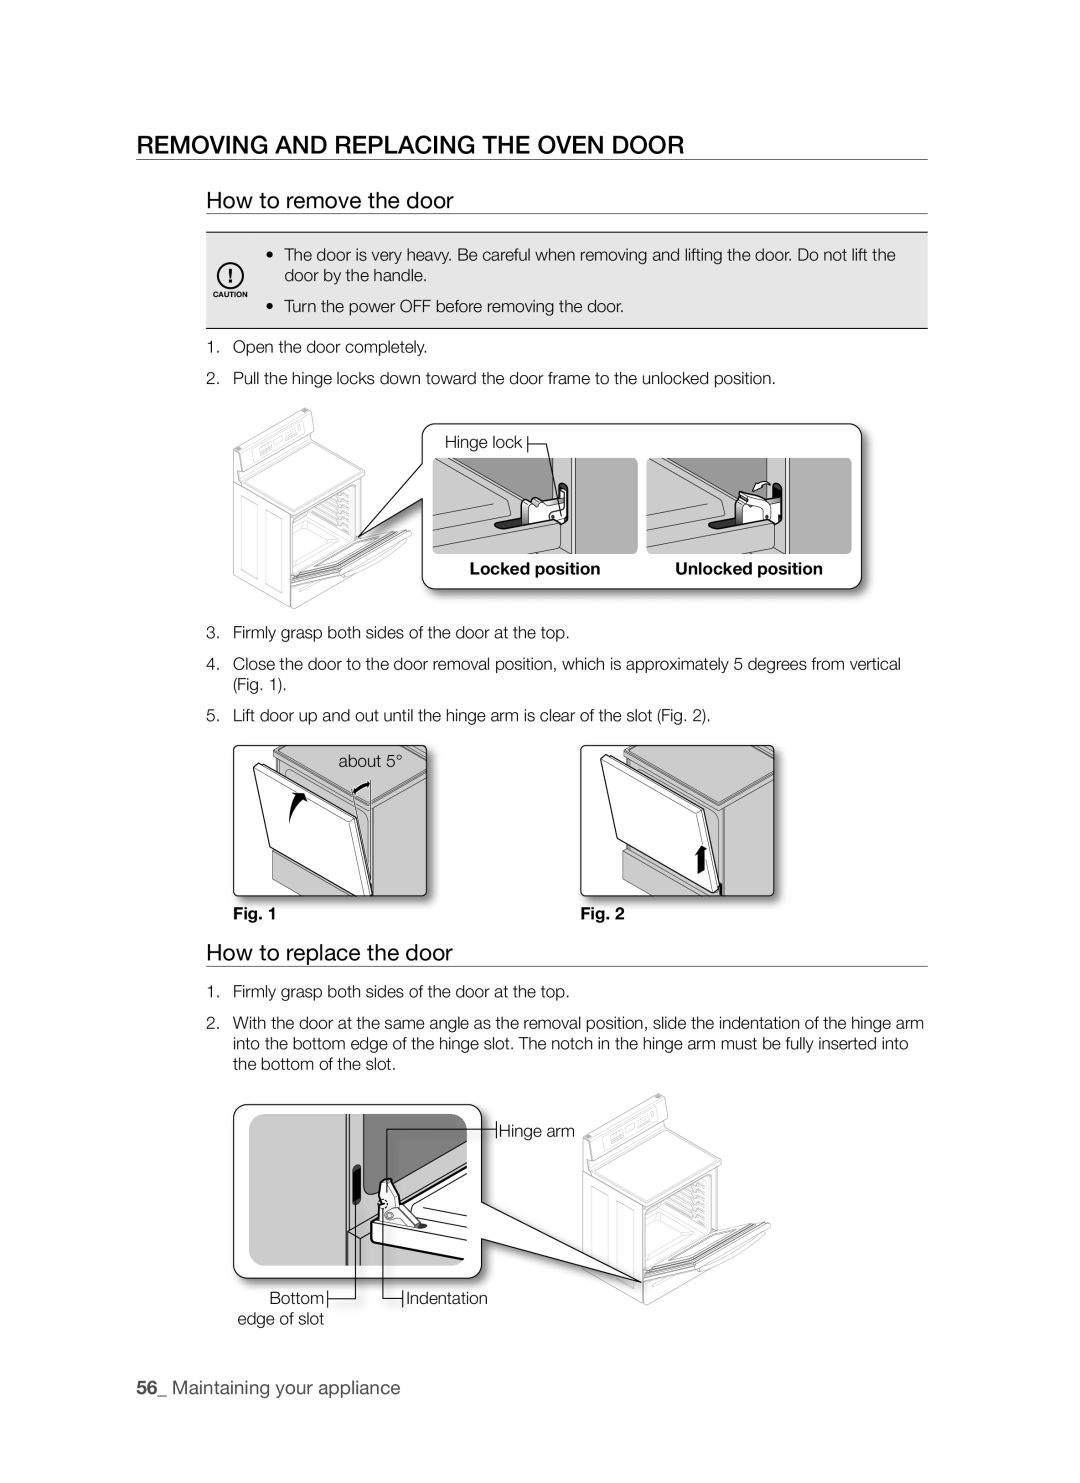 Samsung FTQ307NWGX user manual Removing and replacing the oven door, How to remove the door, How to replace the door 